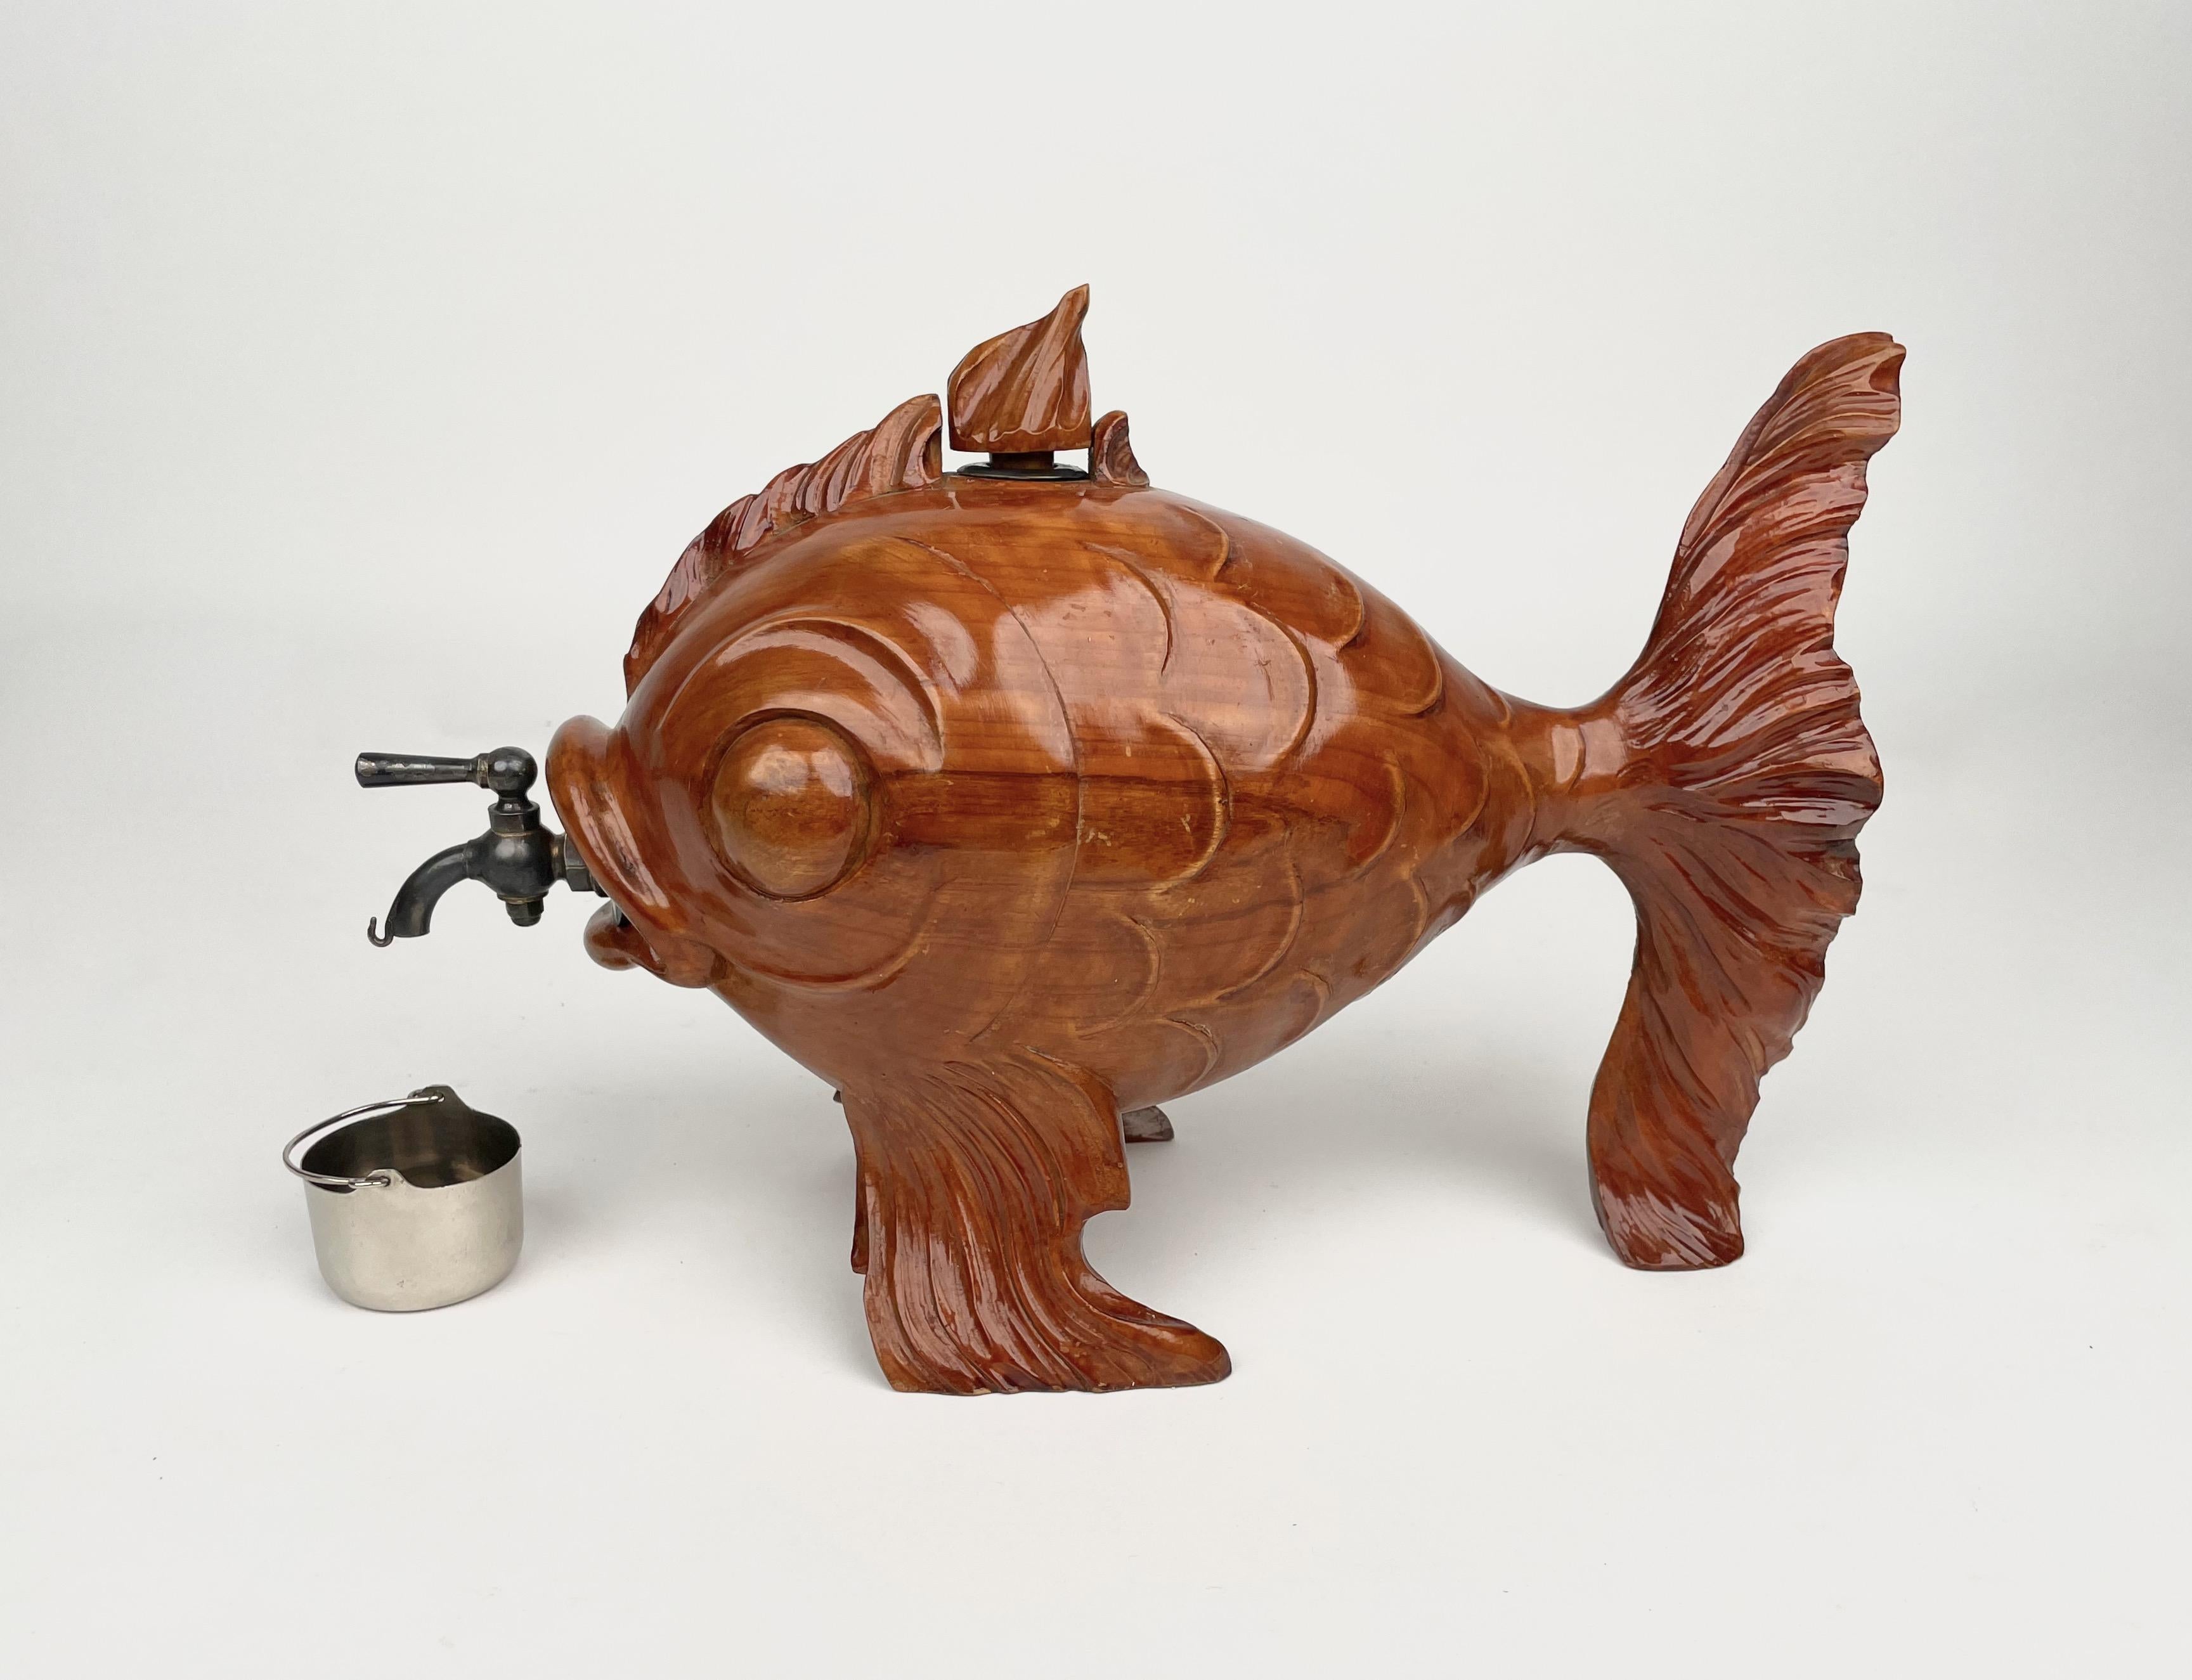 Hand-Carved Fish Bottle Dispenser Hand Carved Wood & Metal Aldo Tura for Macabo Italy 1950s